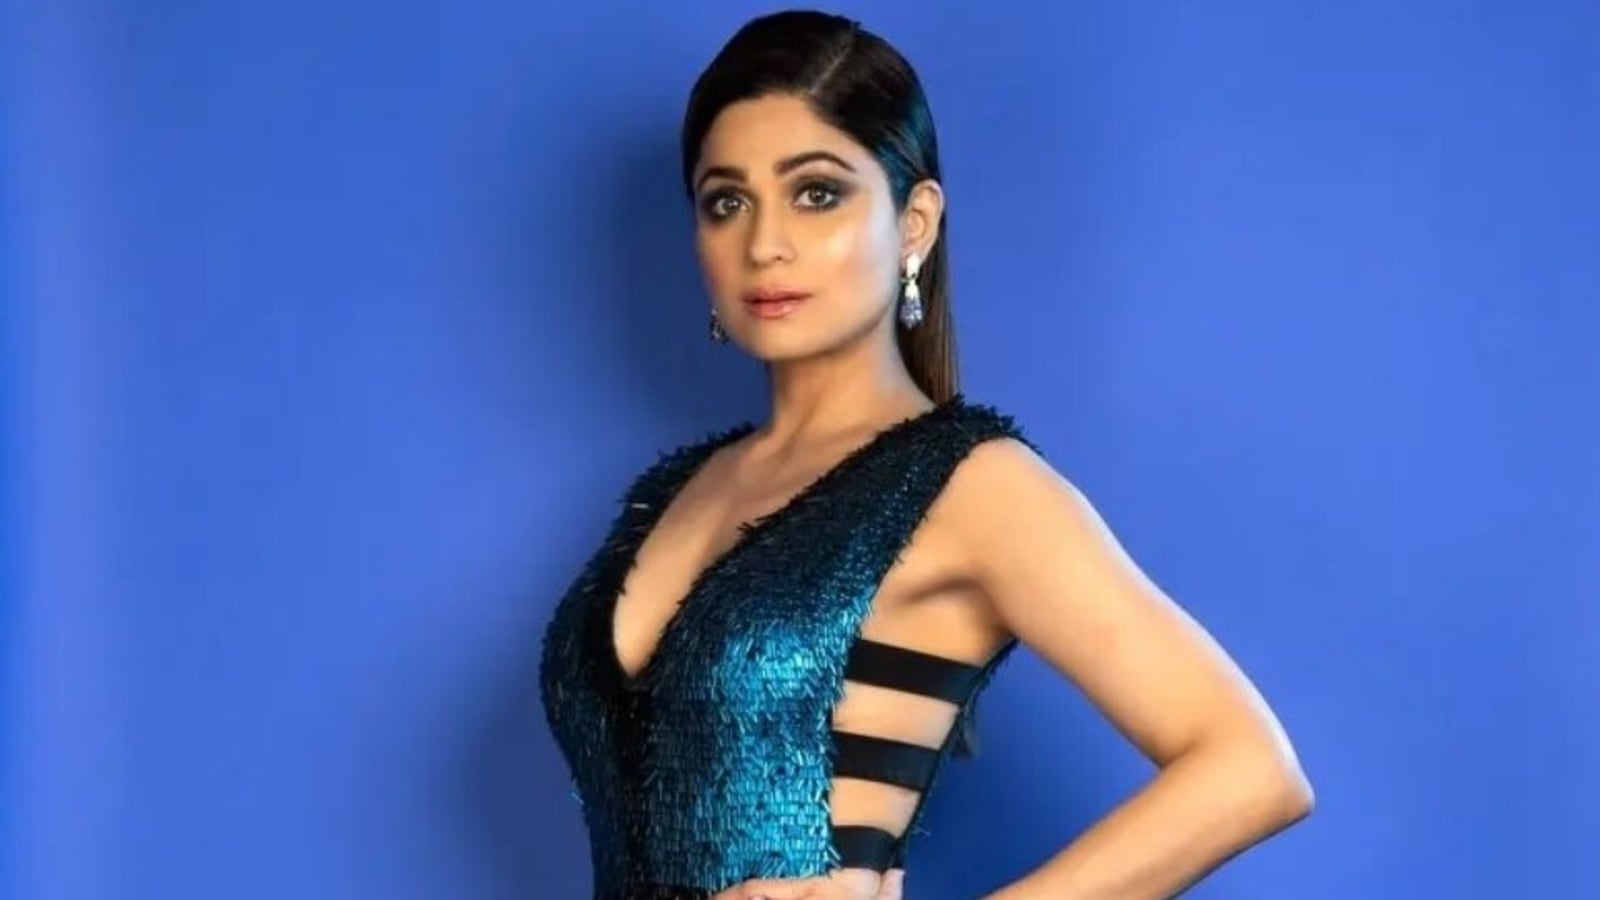 Shamita Shetty in blue gown nails plunging neck fashion at Iconic Gold Awards, fans call her ‘queen’: See pics